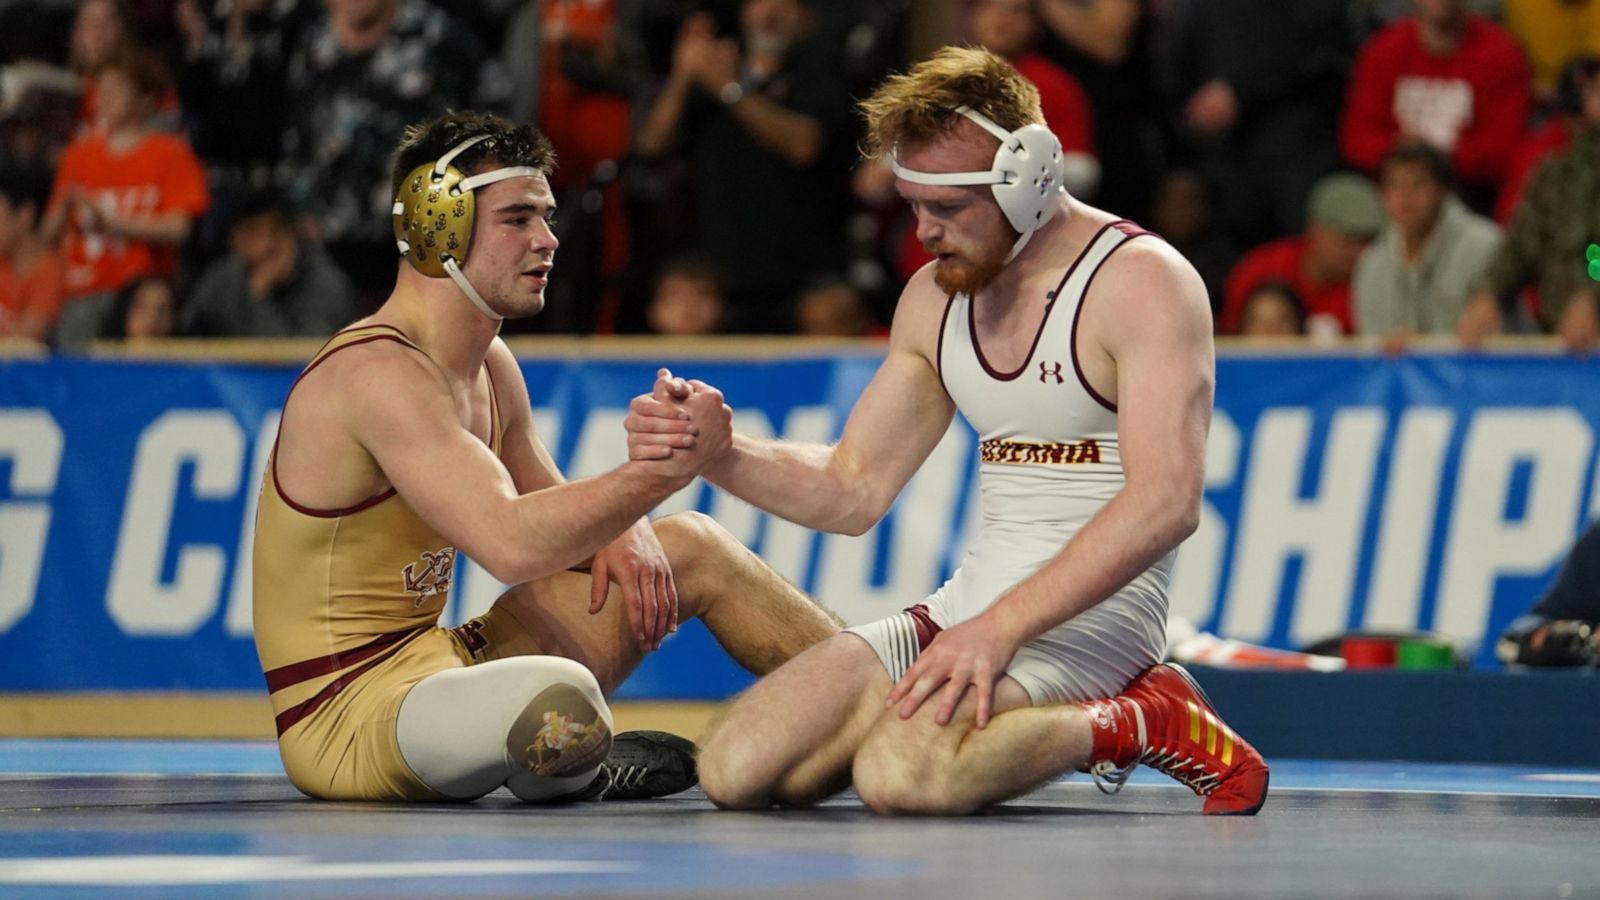 Brothers compete against each other in NCAA wrestling finals Flipboard